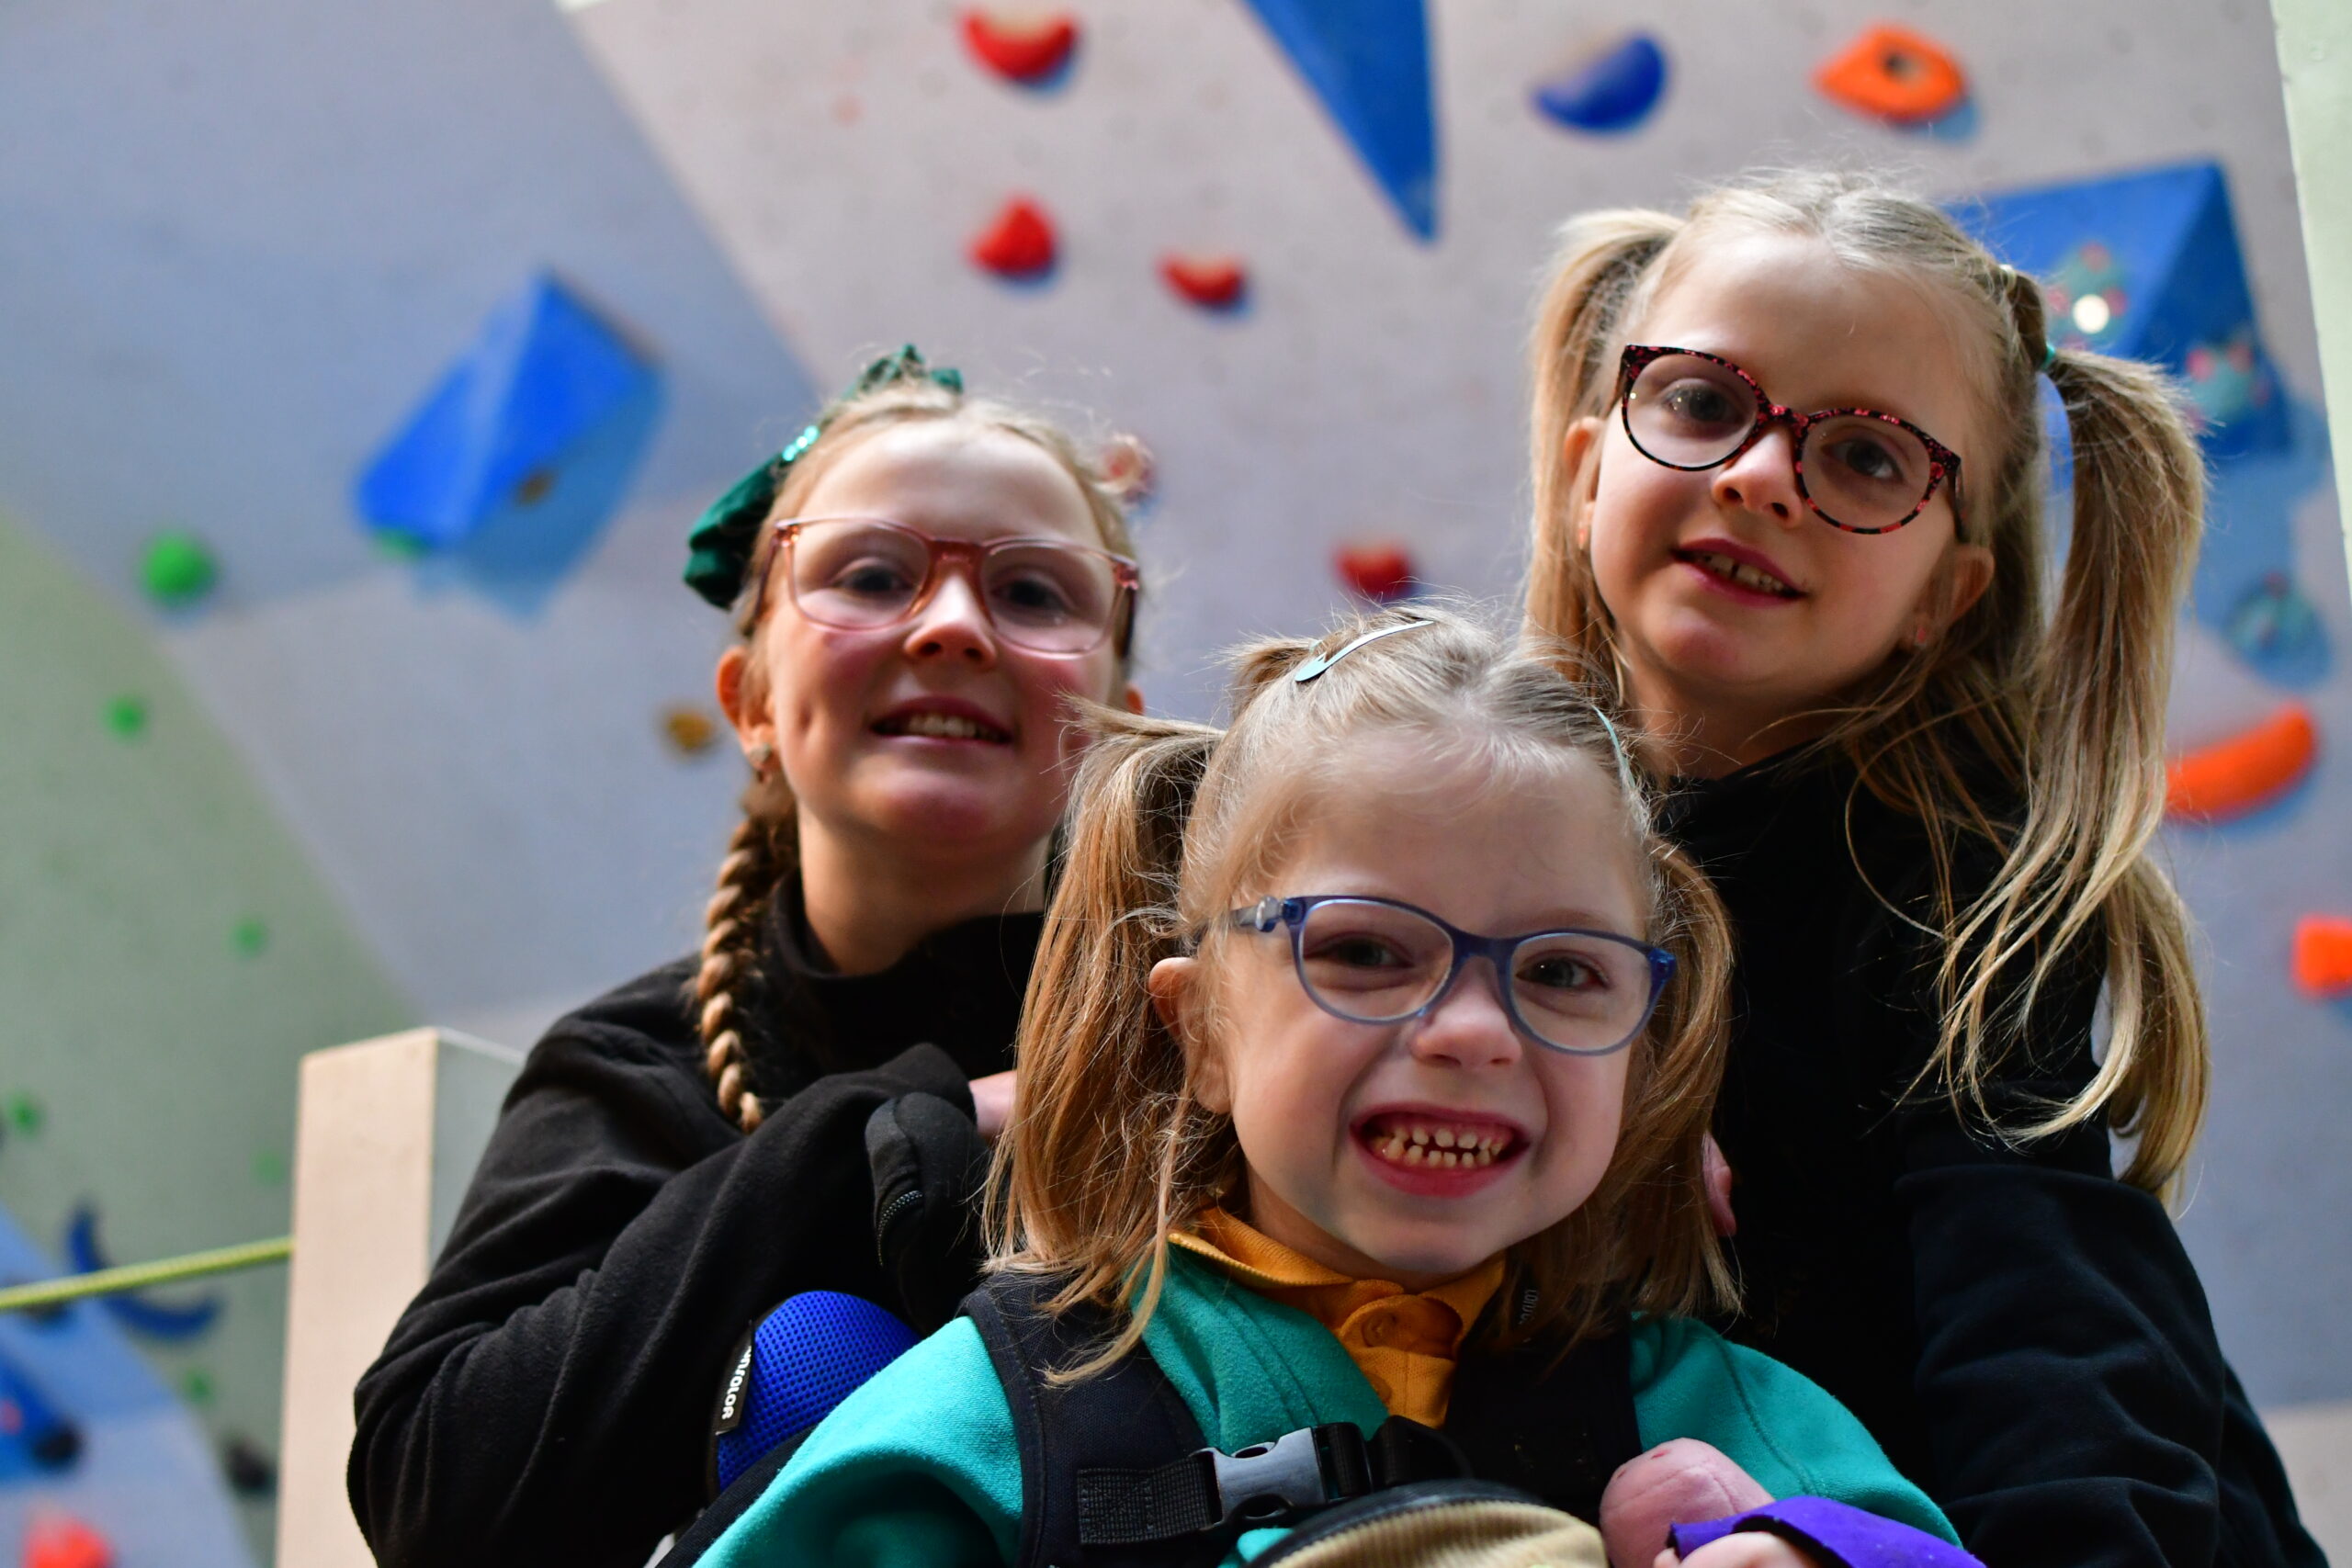 Climbing For All Families launches